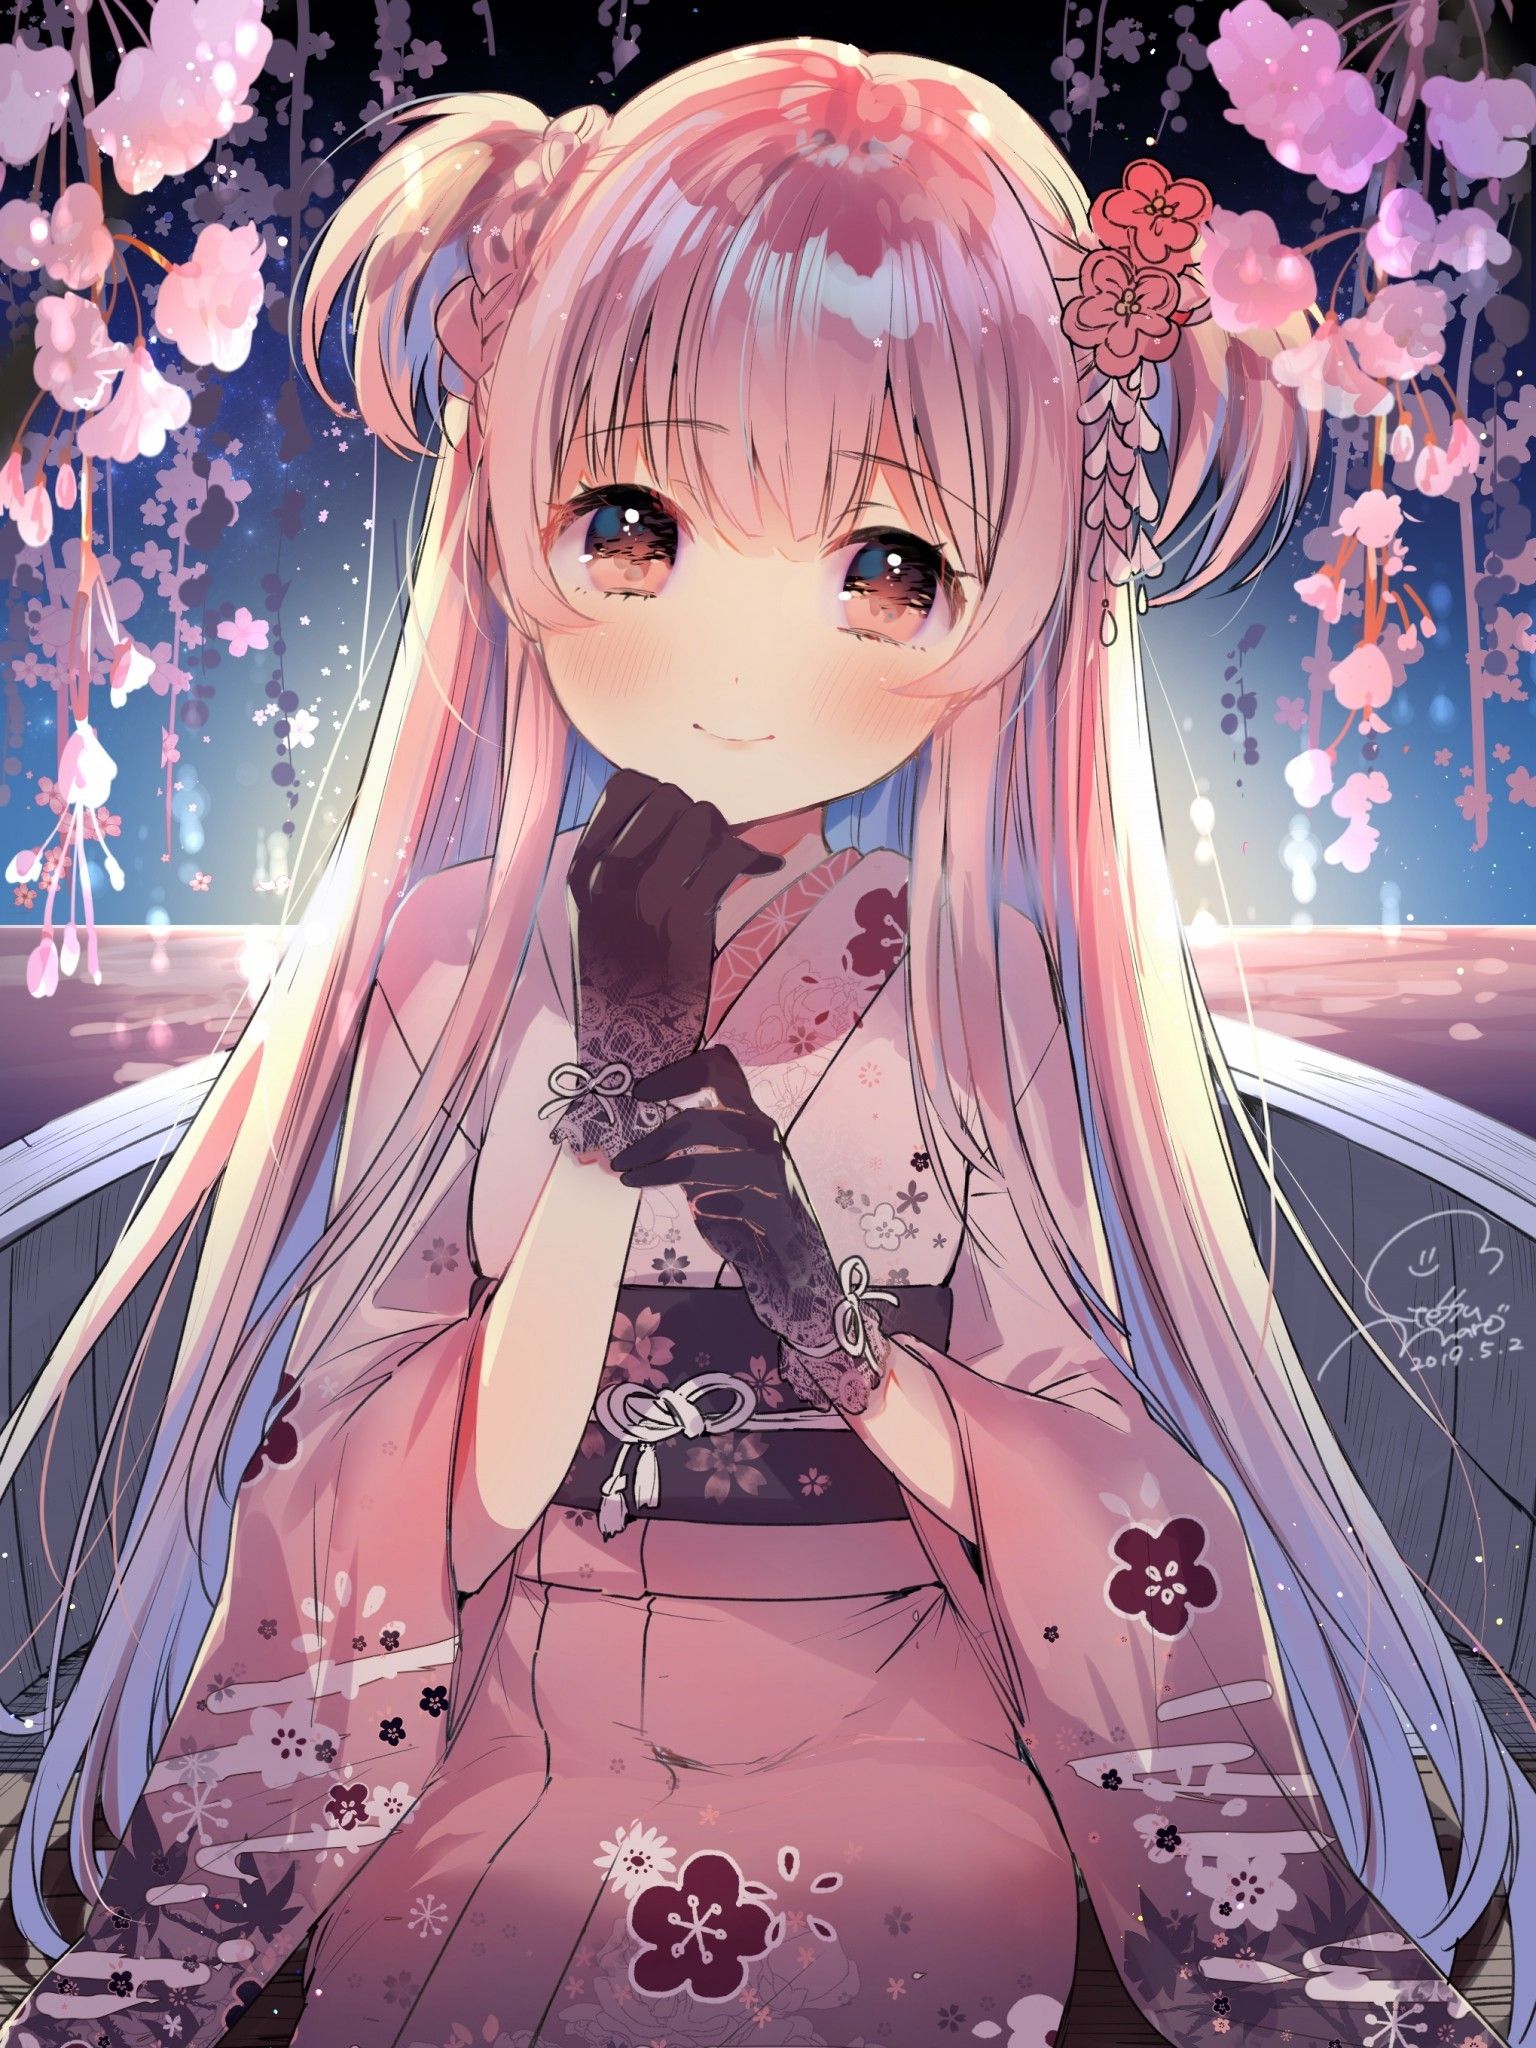 Anime PNG, Anime Transparent Background - FreeIconsPNG